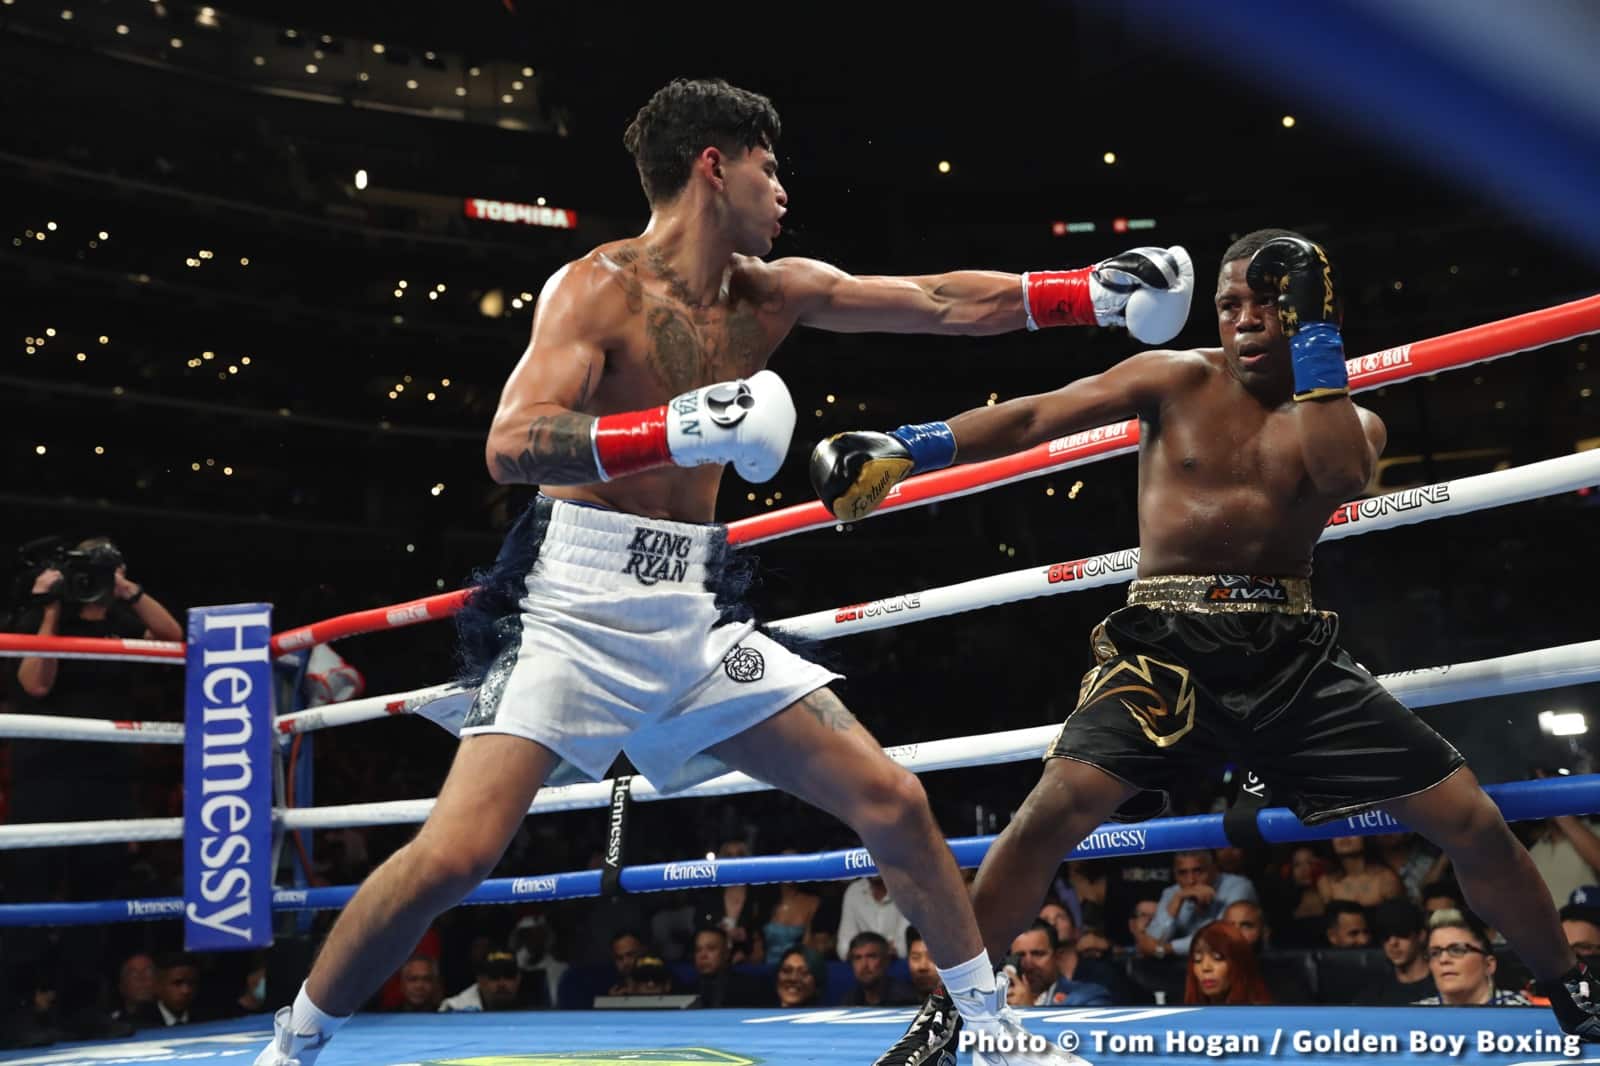 Ryan Garcia vs. Javier Fortuna - Live action results from Los Angeles